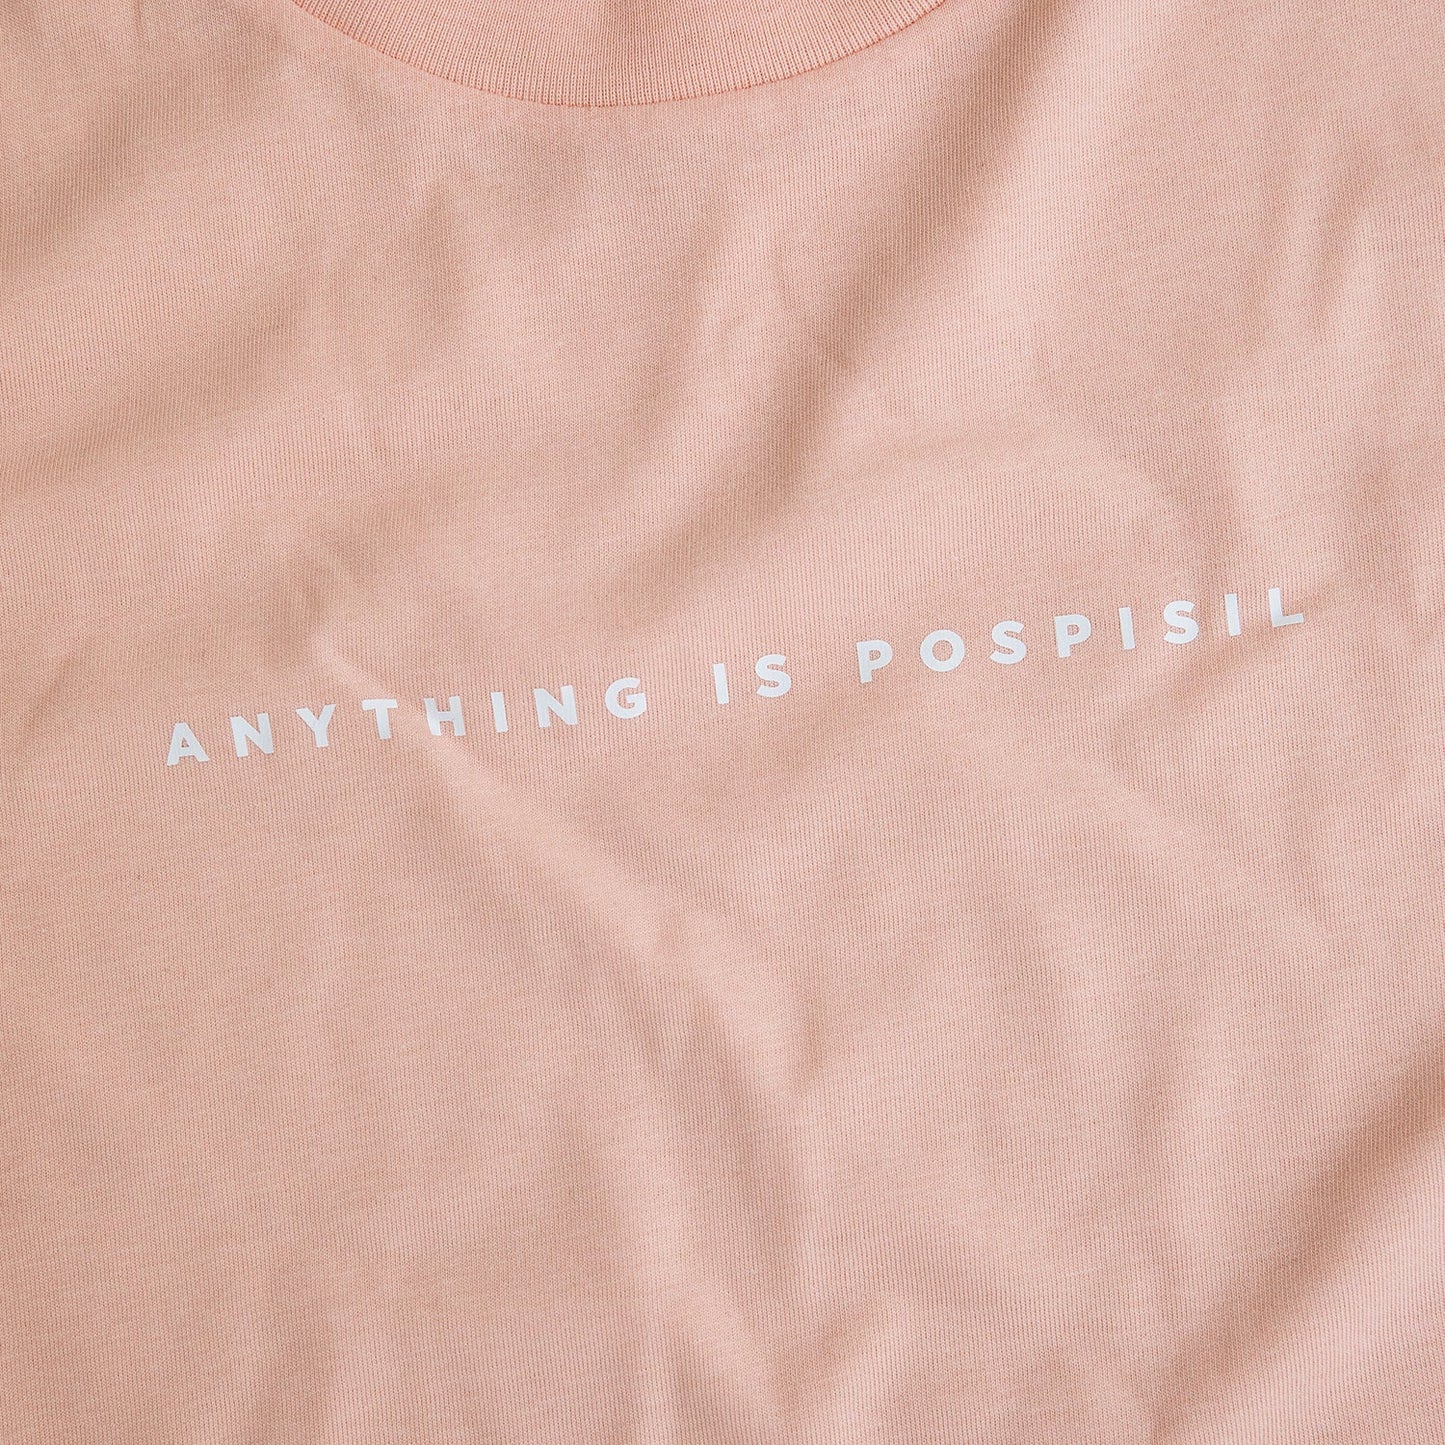 Women's "Anything is Pospisil" Shirt - Pale Pink